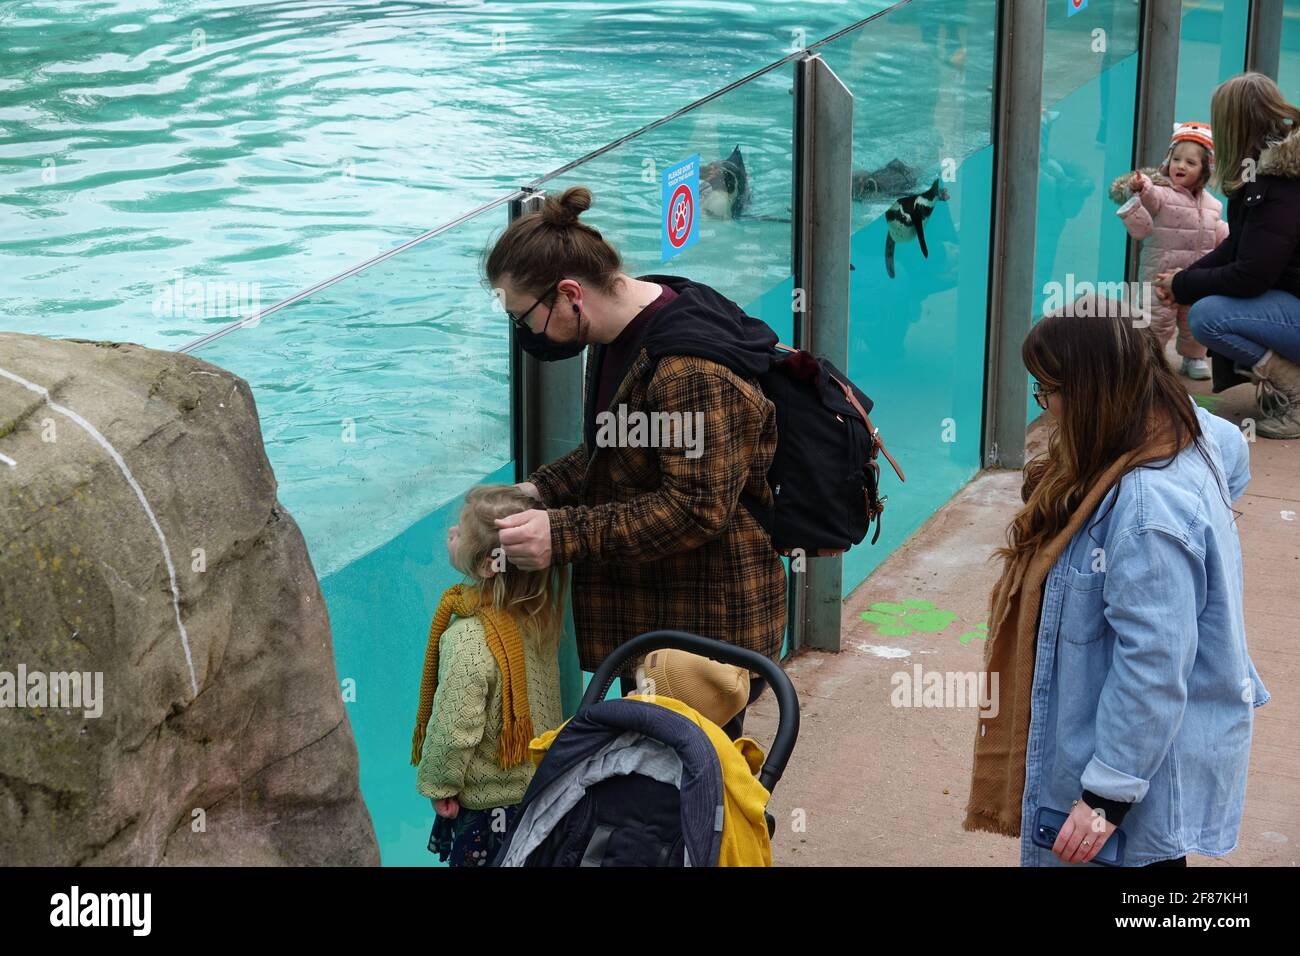 London, UK. 12th April 2021. A family enjoys the penguins at ZSL London Zoo on opening day following covid19 restrictions. Credit: Bradley Taylor / Alamy Live News Stock Photo